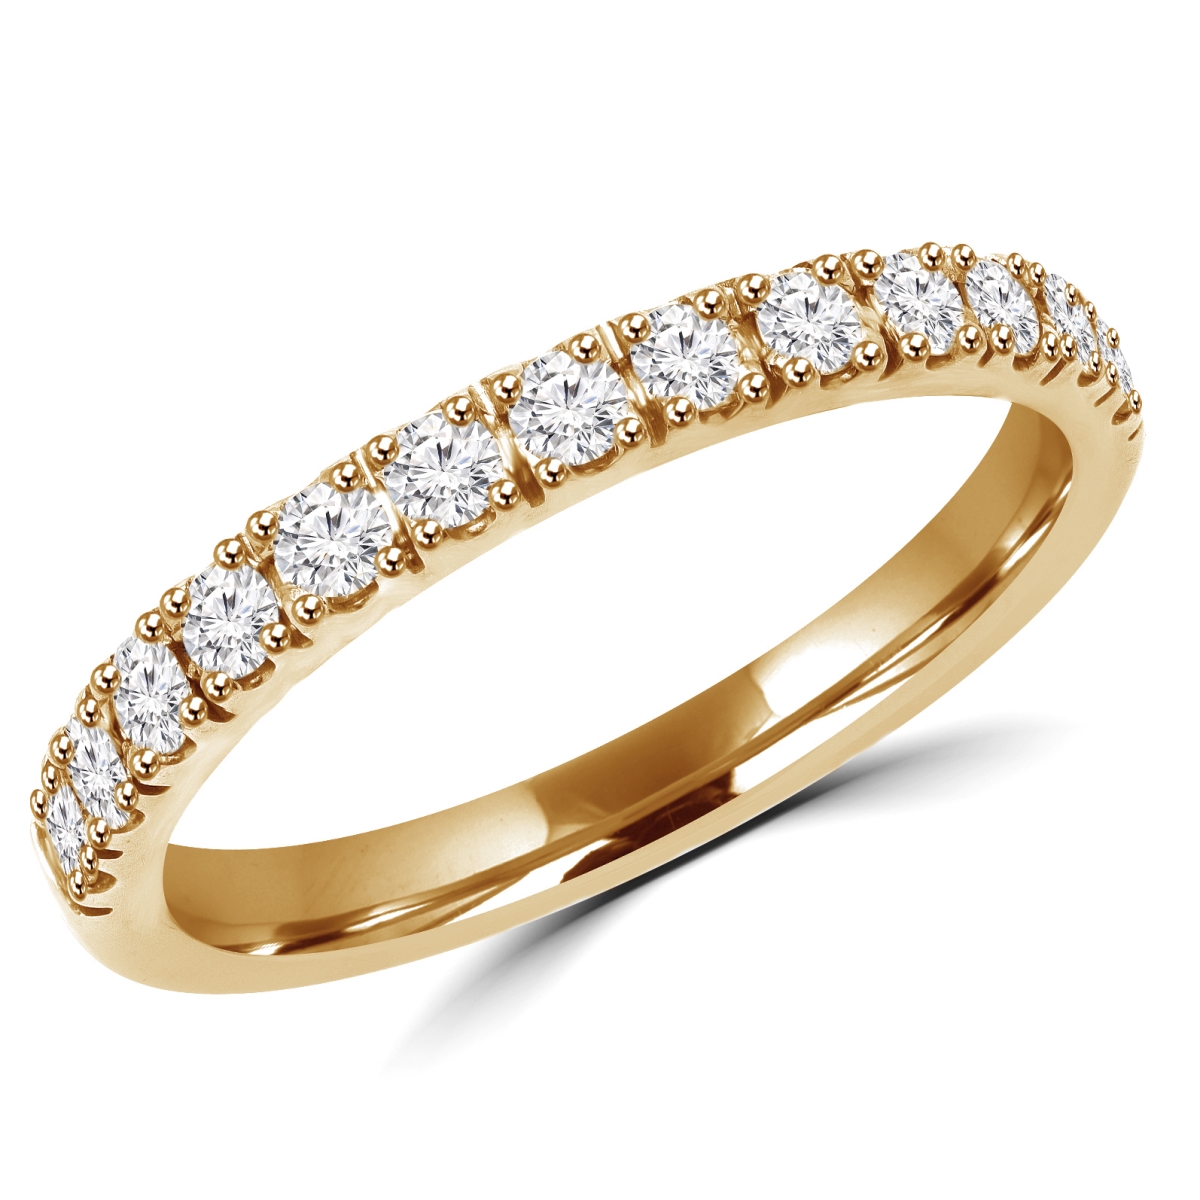 Picture of Majesty Diamonds MD180187-7.5 0.3 CTW Round Diamond Semi-Eternity Wedding Band Ring in 14K Yellow Gold - Size 7.5